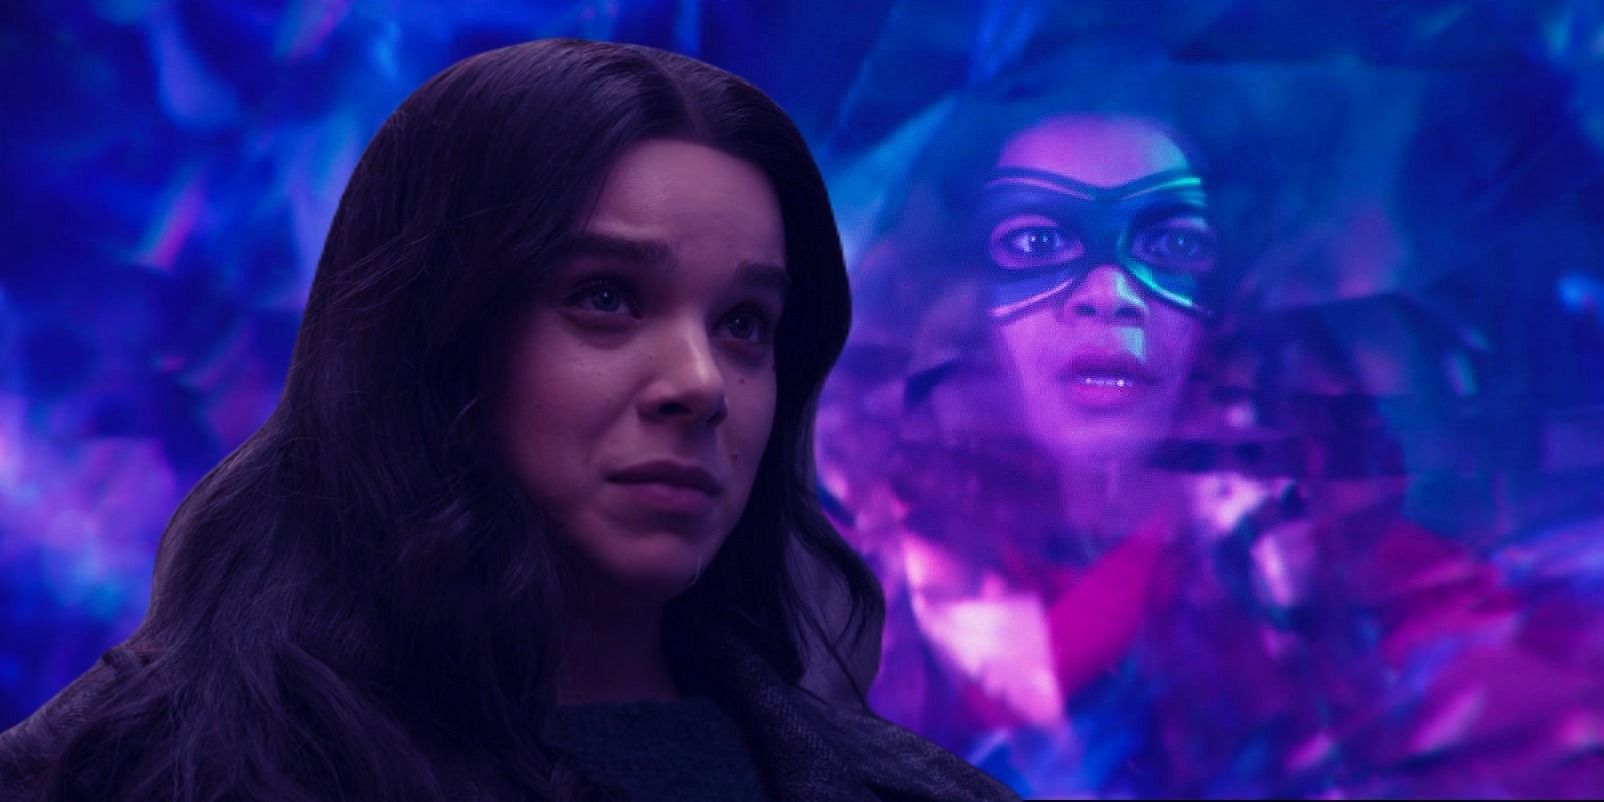 Kamala Khan as Ms. Marvel in awe of her powers and Kate Bishop in hockey in the foreground watching